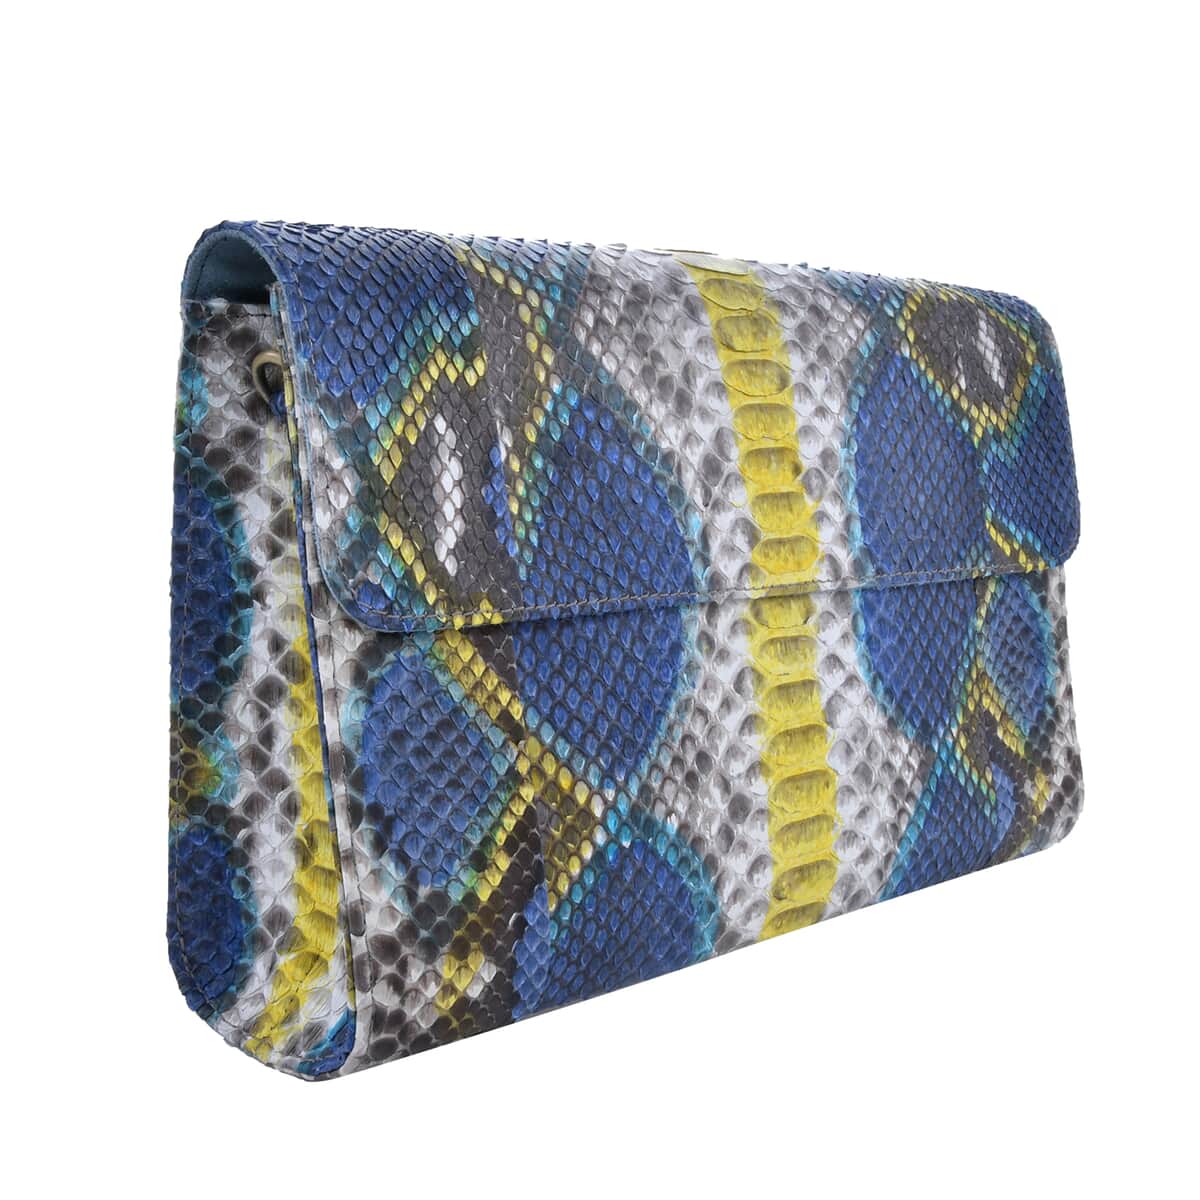 The Pelle Collection Peacock Blue Python Leather Evening Clutch Bag with Detachable Strap, Clutches for Women, Leather Handbag, Clutch Purse image number 3